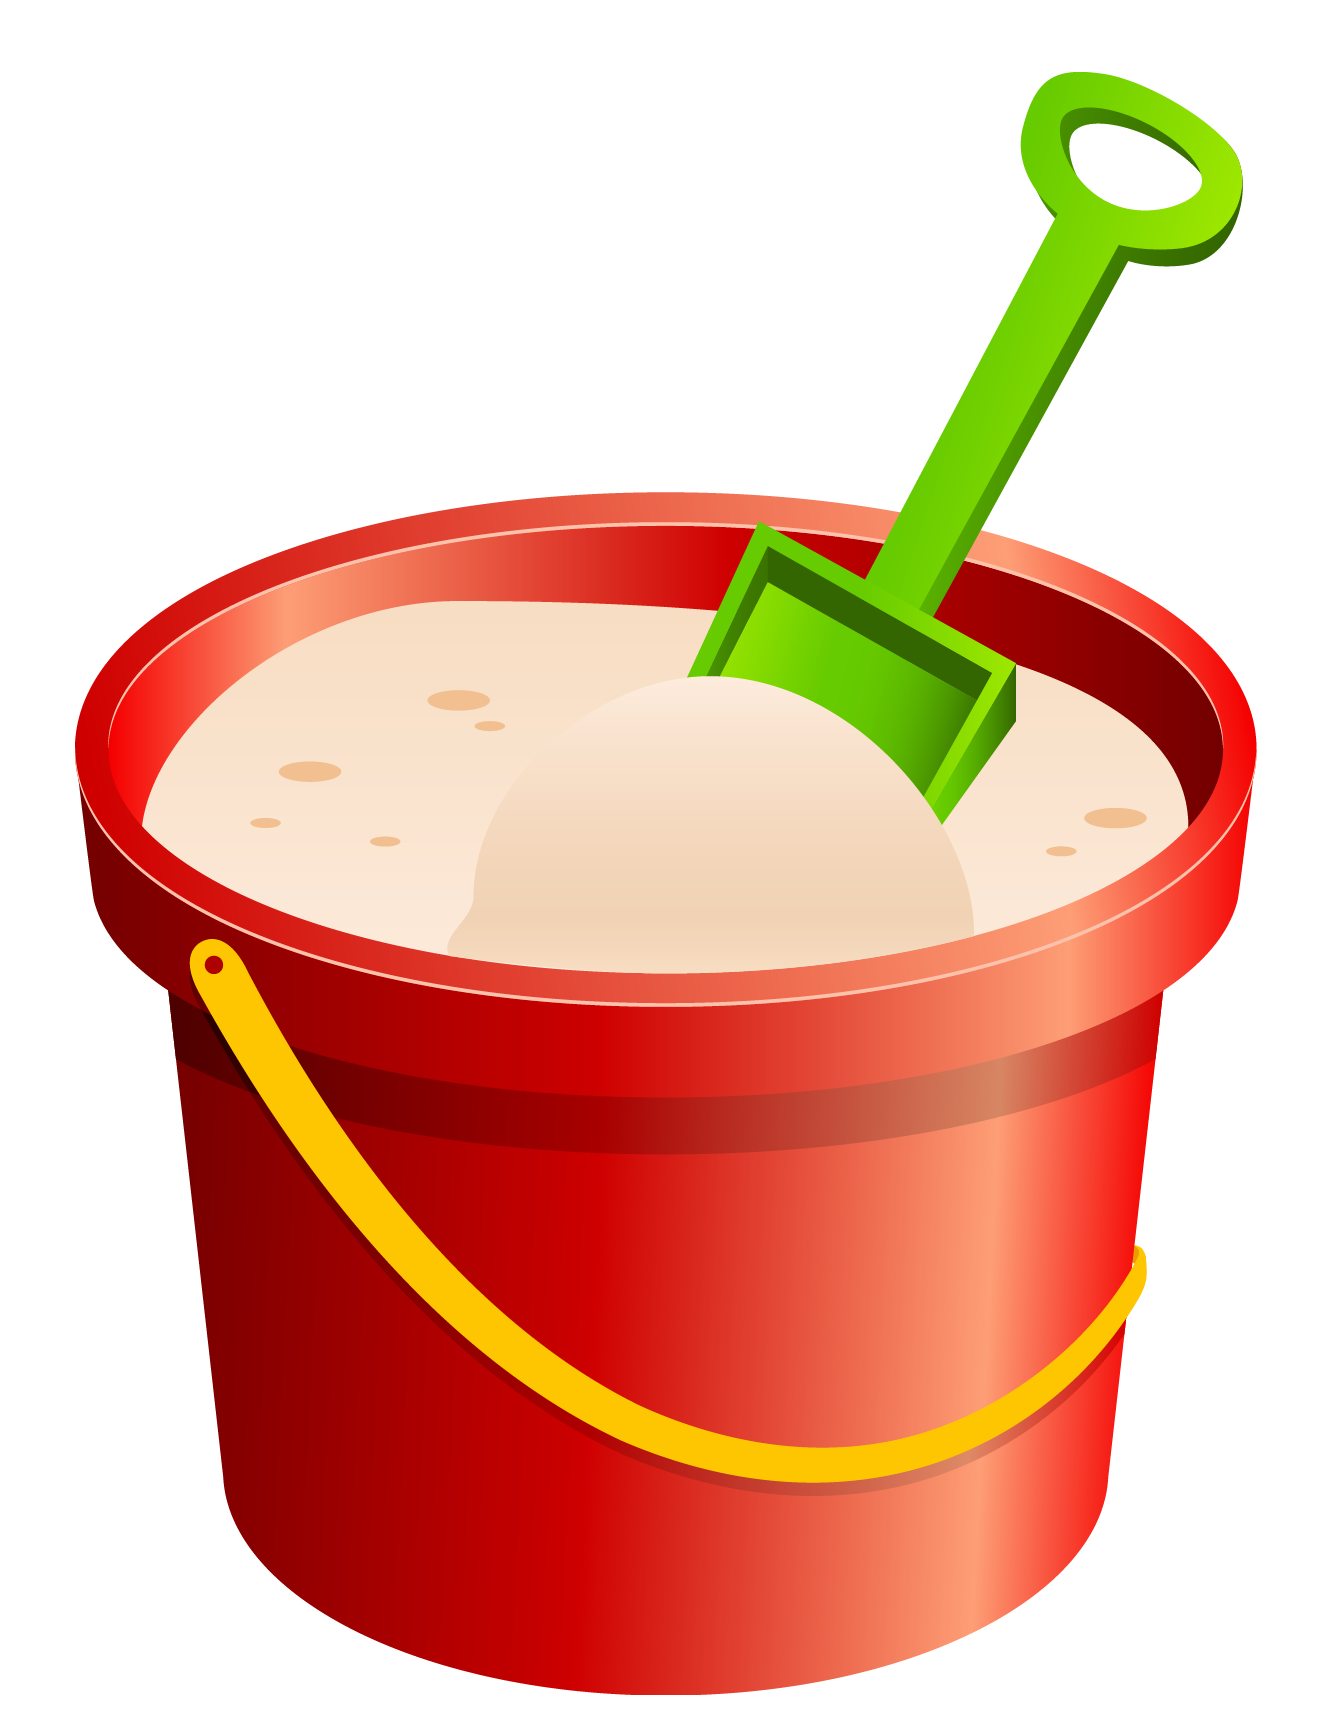 Red sand bucket and green shovel clipart image #28587